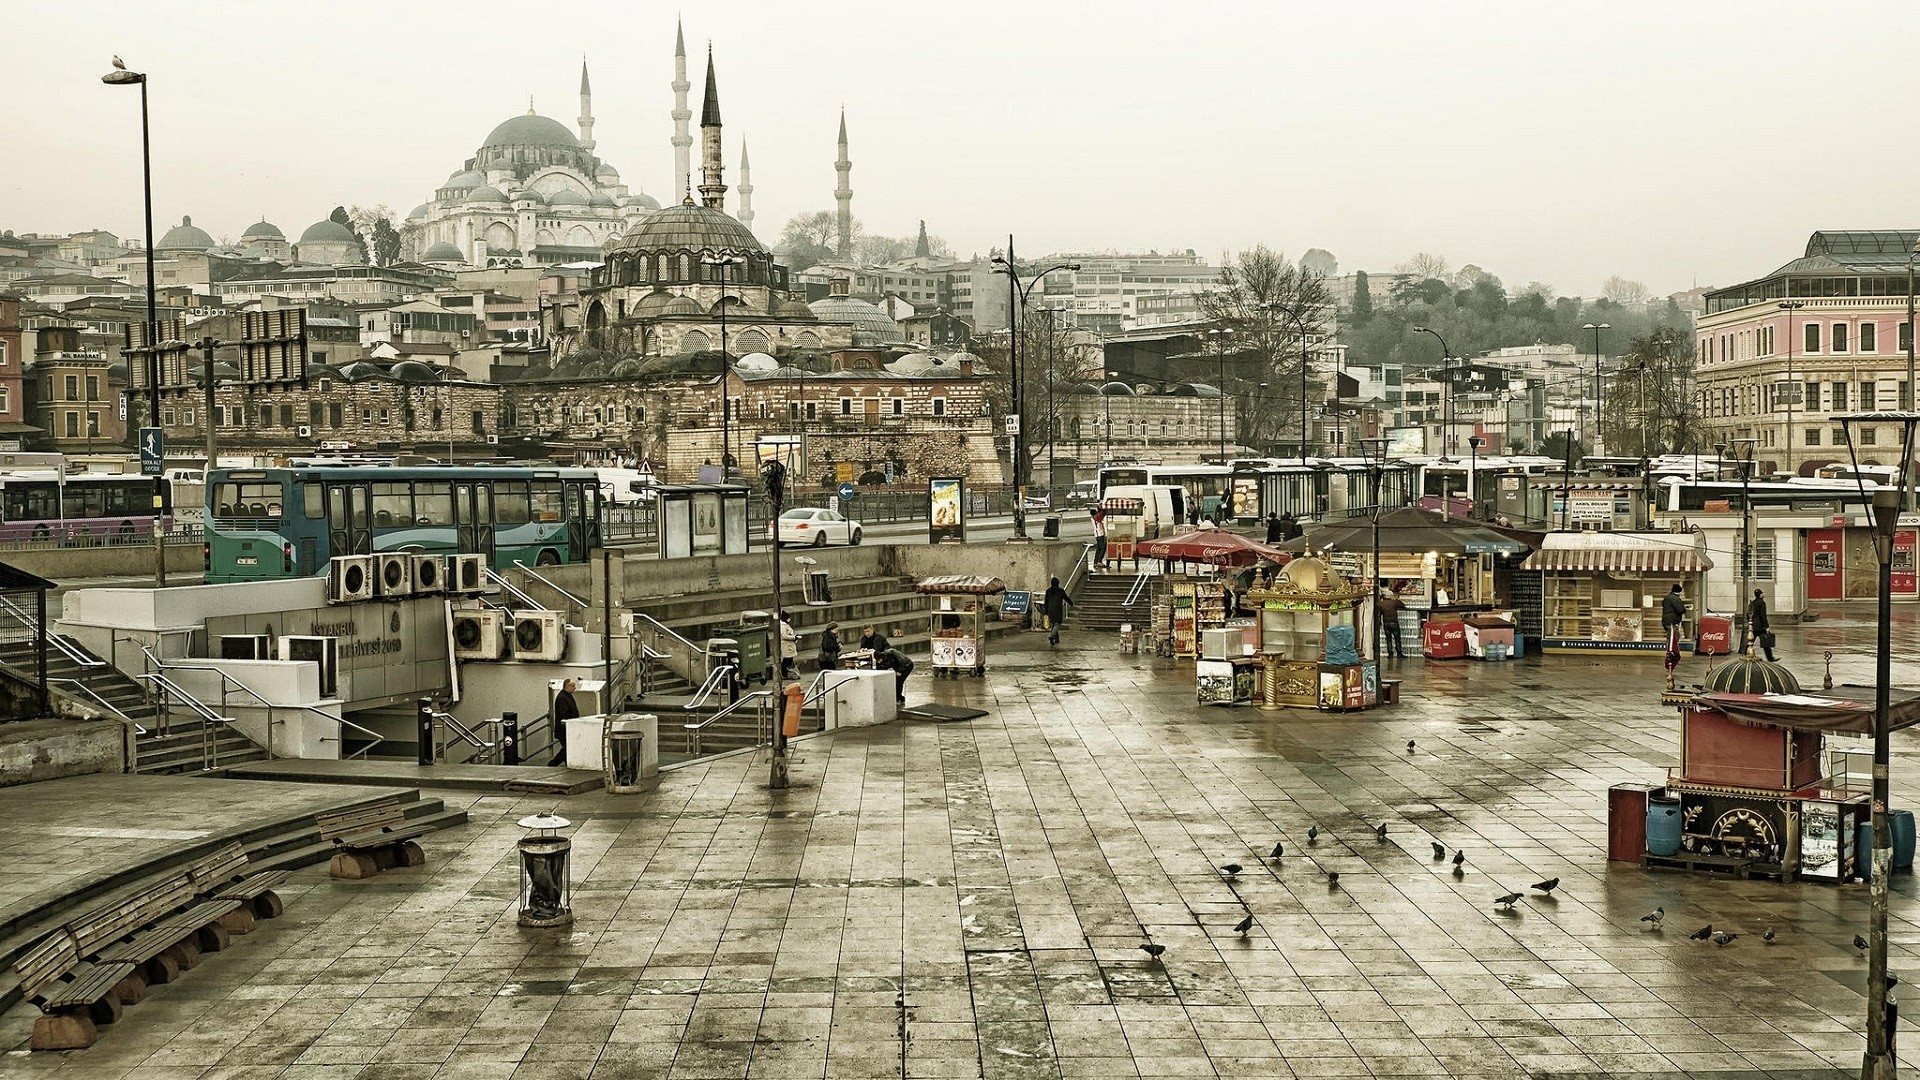 City Square: A view of the Hagia Sophia Grand Mosque in Istanbul, The former Church of the Holy Wisdom, Turkey. 1920x1080 Full HD Background.